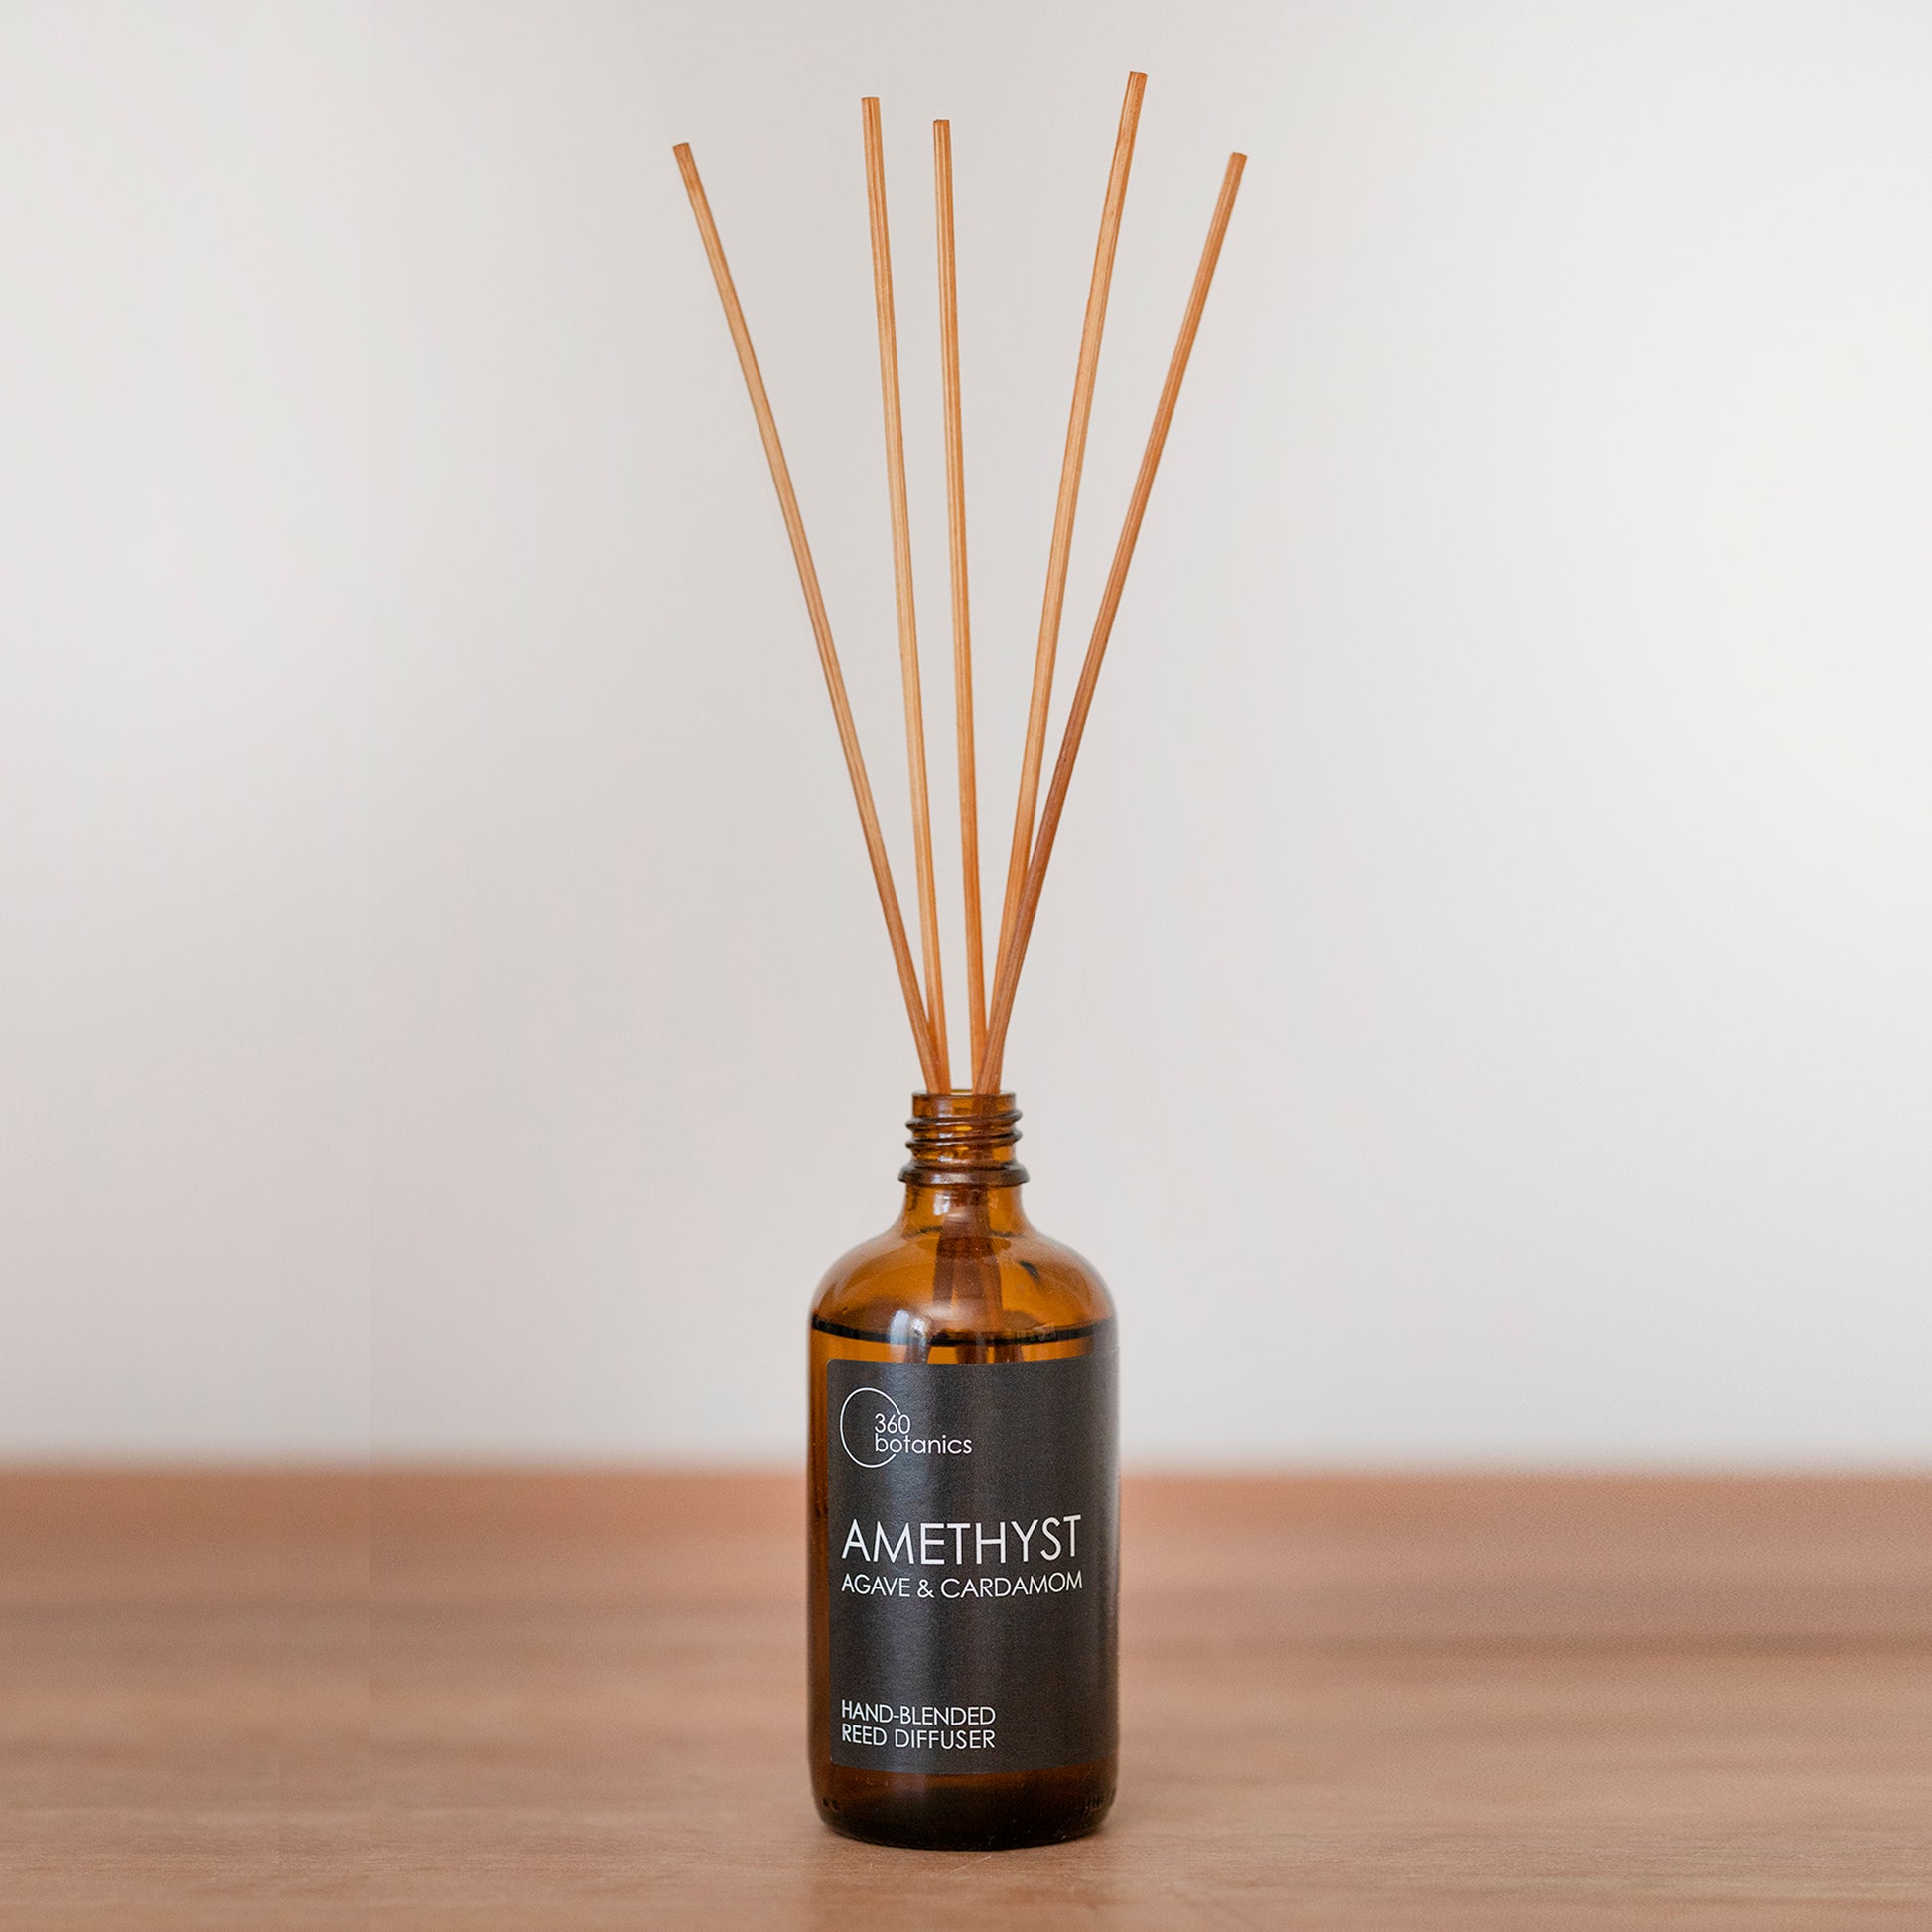 A 360 Botanics Amethyst reed diffuser with agave and cardamom sits on a wooden surface. The amber glass bottle and its array of light brown reeds are set against a soft white background, creating a warm and inviting ambiance, and indicating the product's natural scent profile